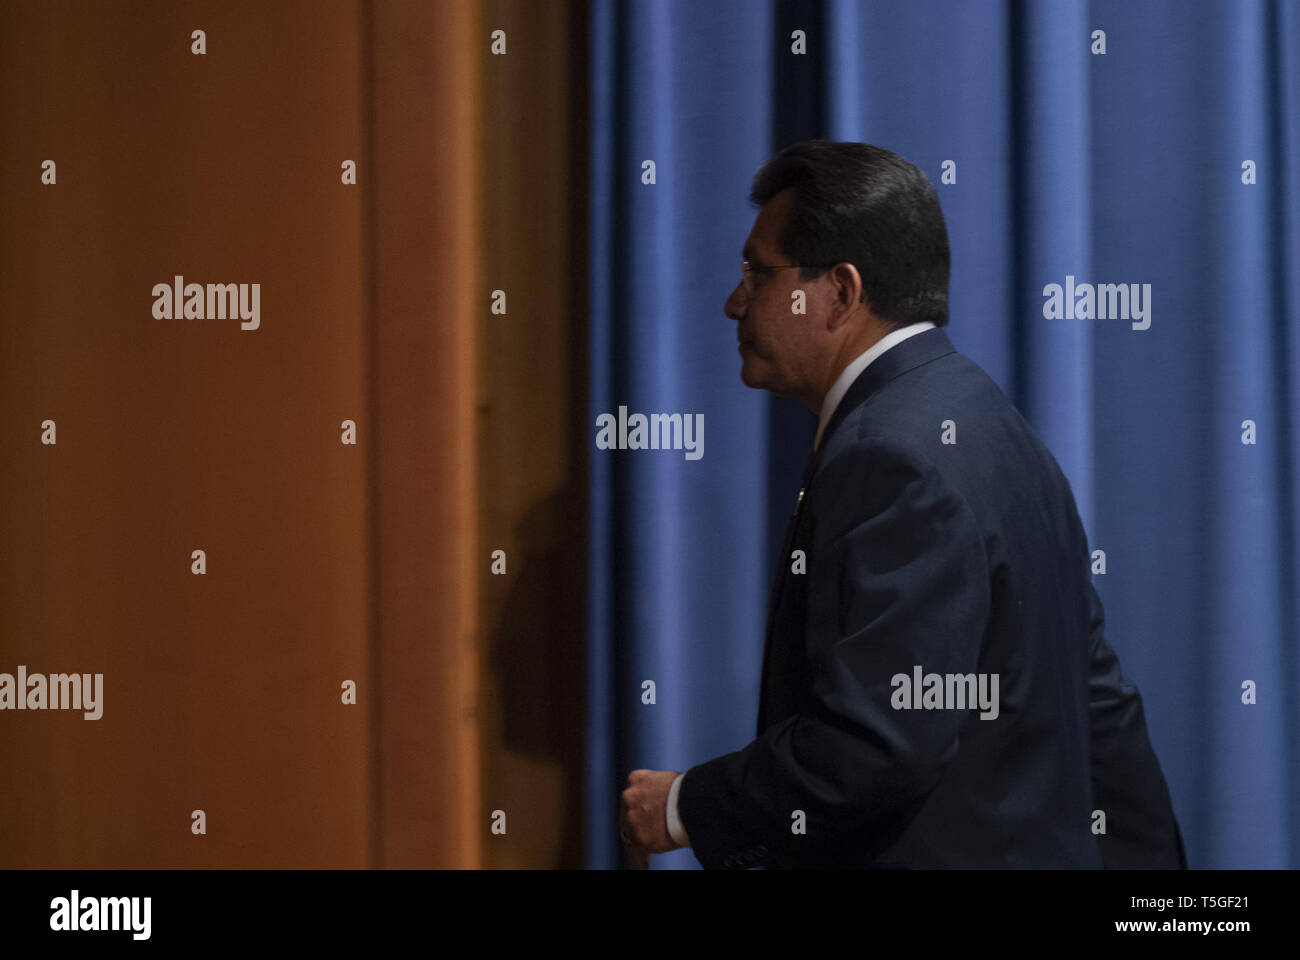 Washington, DC, USA. 27th Aug, 2007. Attorney General Alberto Gonzales walks away from the podium at the Department of Justice media room after announcing his resignation during a press conference at the Department of Justice in Washington, DC, Aug. 27, 2007.Gonzales has been under pressure to resign amid scandals about the firing of eight U.S. attorneys and the government's terrorism survelliance activities.Gonzales was President George W. Bush's attorney general in Texas when Bush was govenor of that state. Credit: Bill Putnam/ZUMA Wire/Alamy Live News Stock Photo